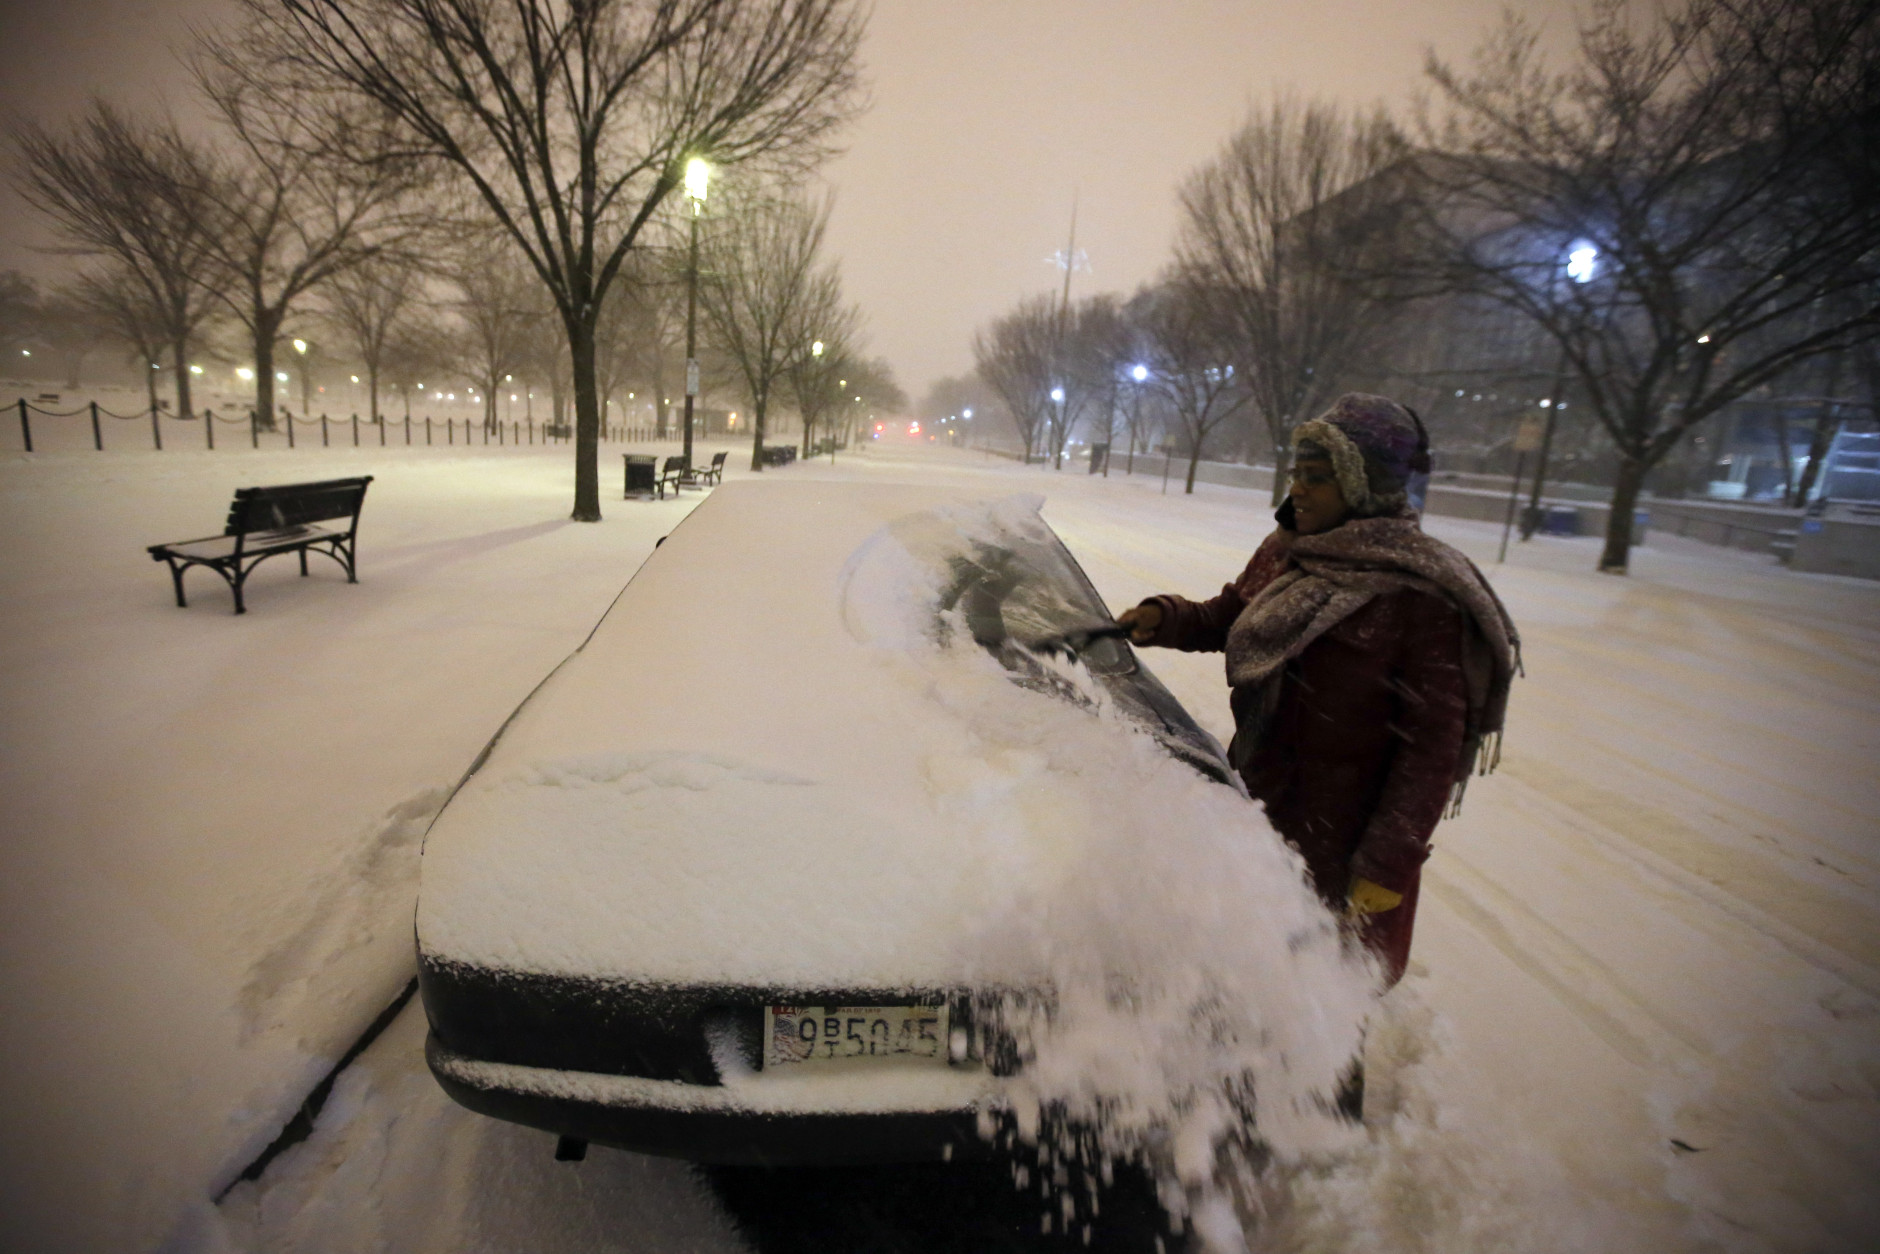 Ndimyake Mwakalyelye cleans off her car after getting off work, as the snow continues to fall, Friday, Jan. 22, 2016 in Washington. (AP Photo/Alex Brandon)